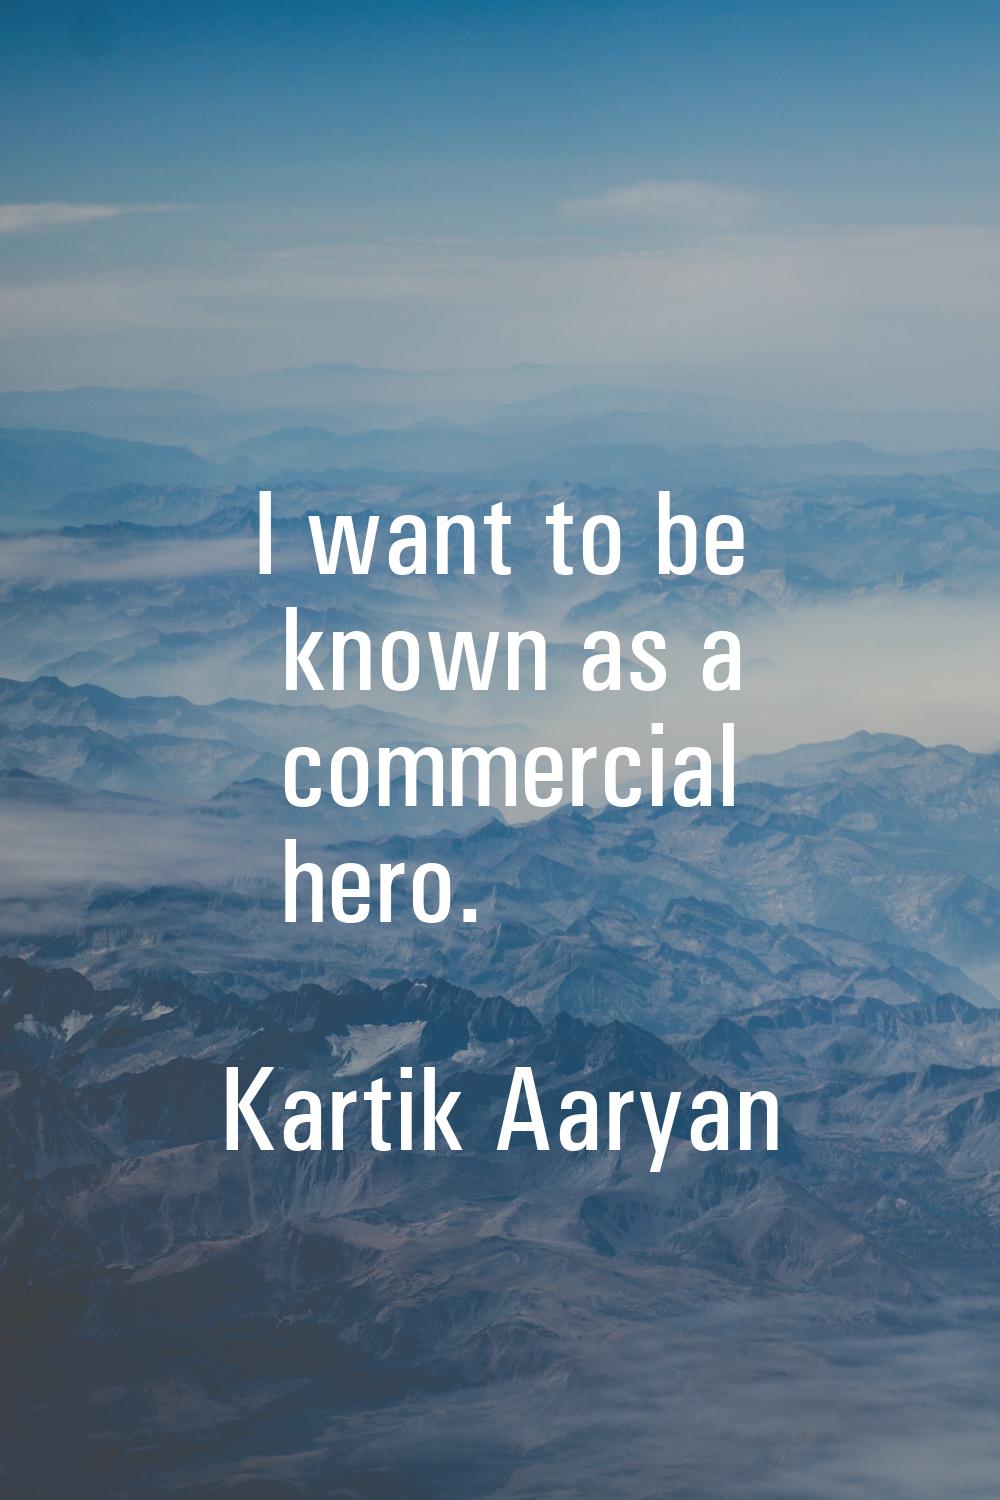 I want to be known as a commercial hero.